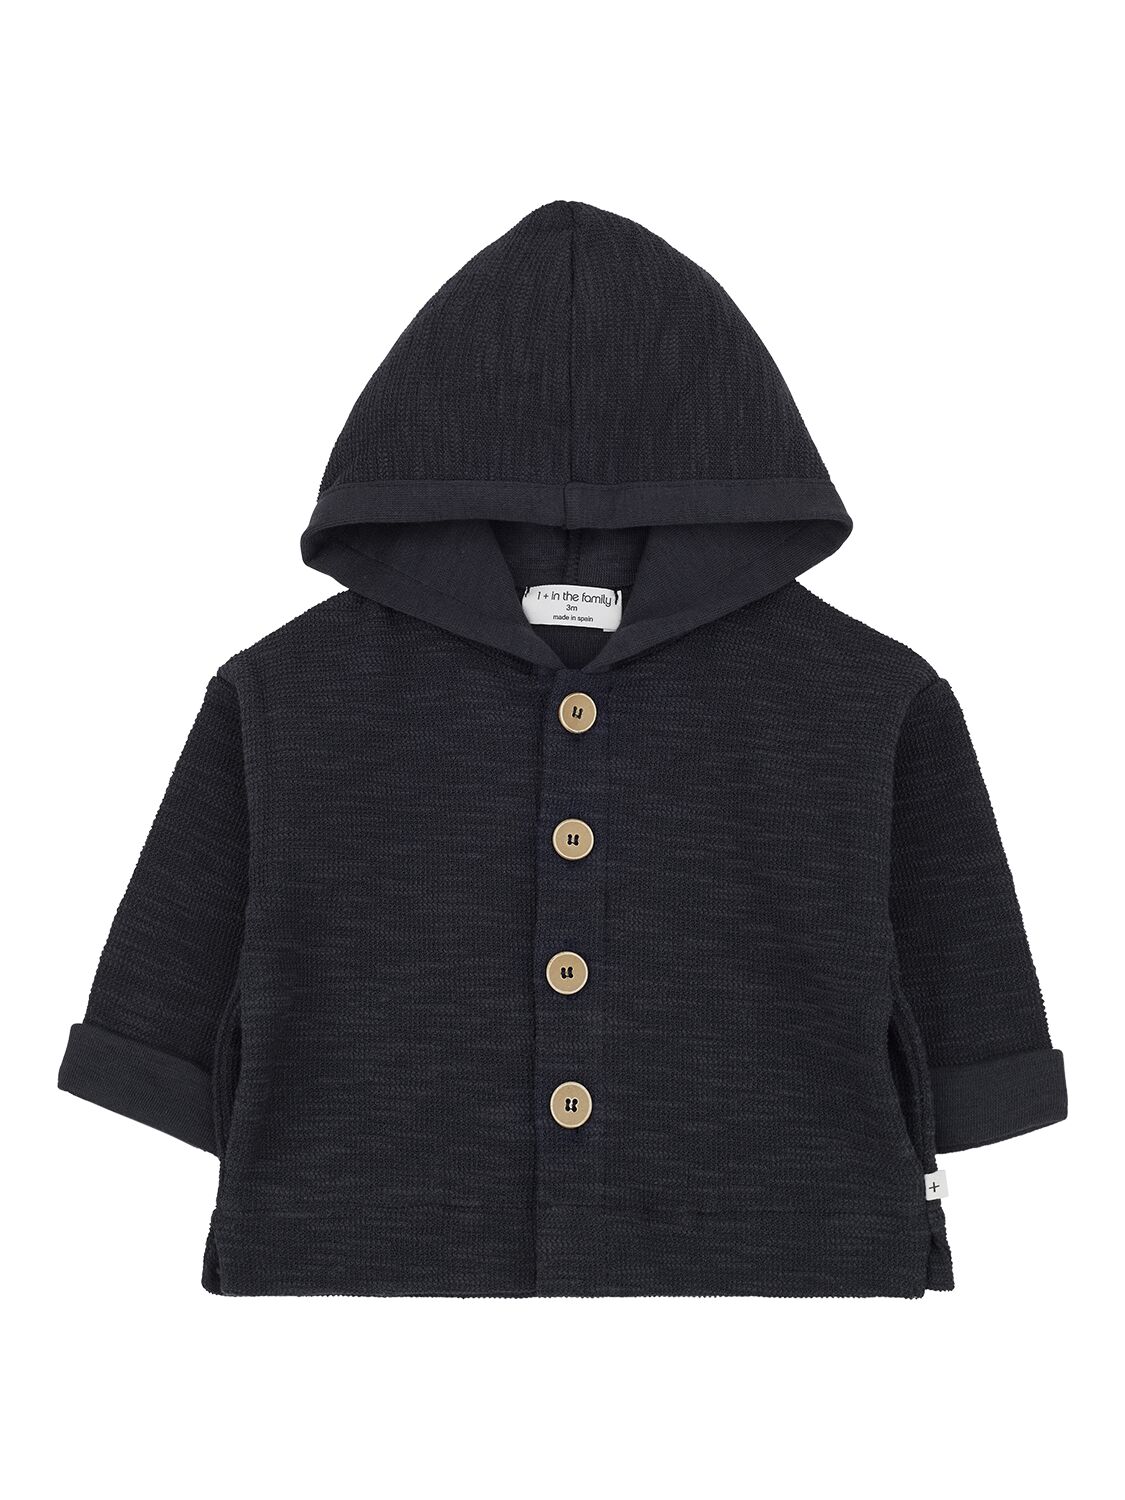 1+ In The Family Kids' Cotton Blend Hooded Jacket In Grey